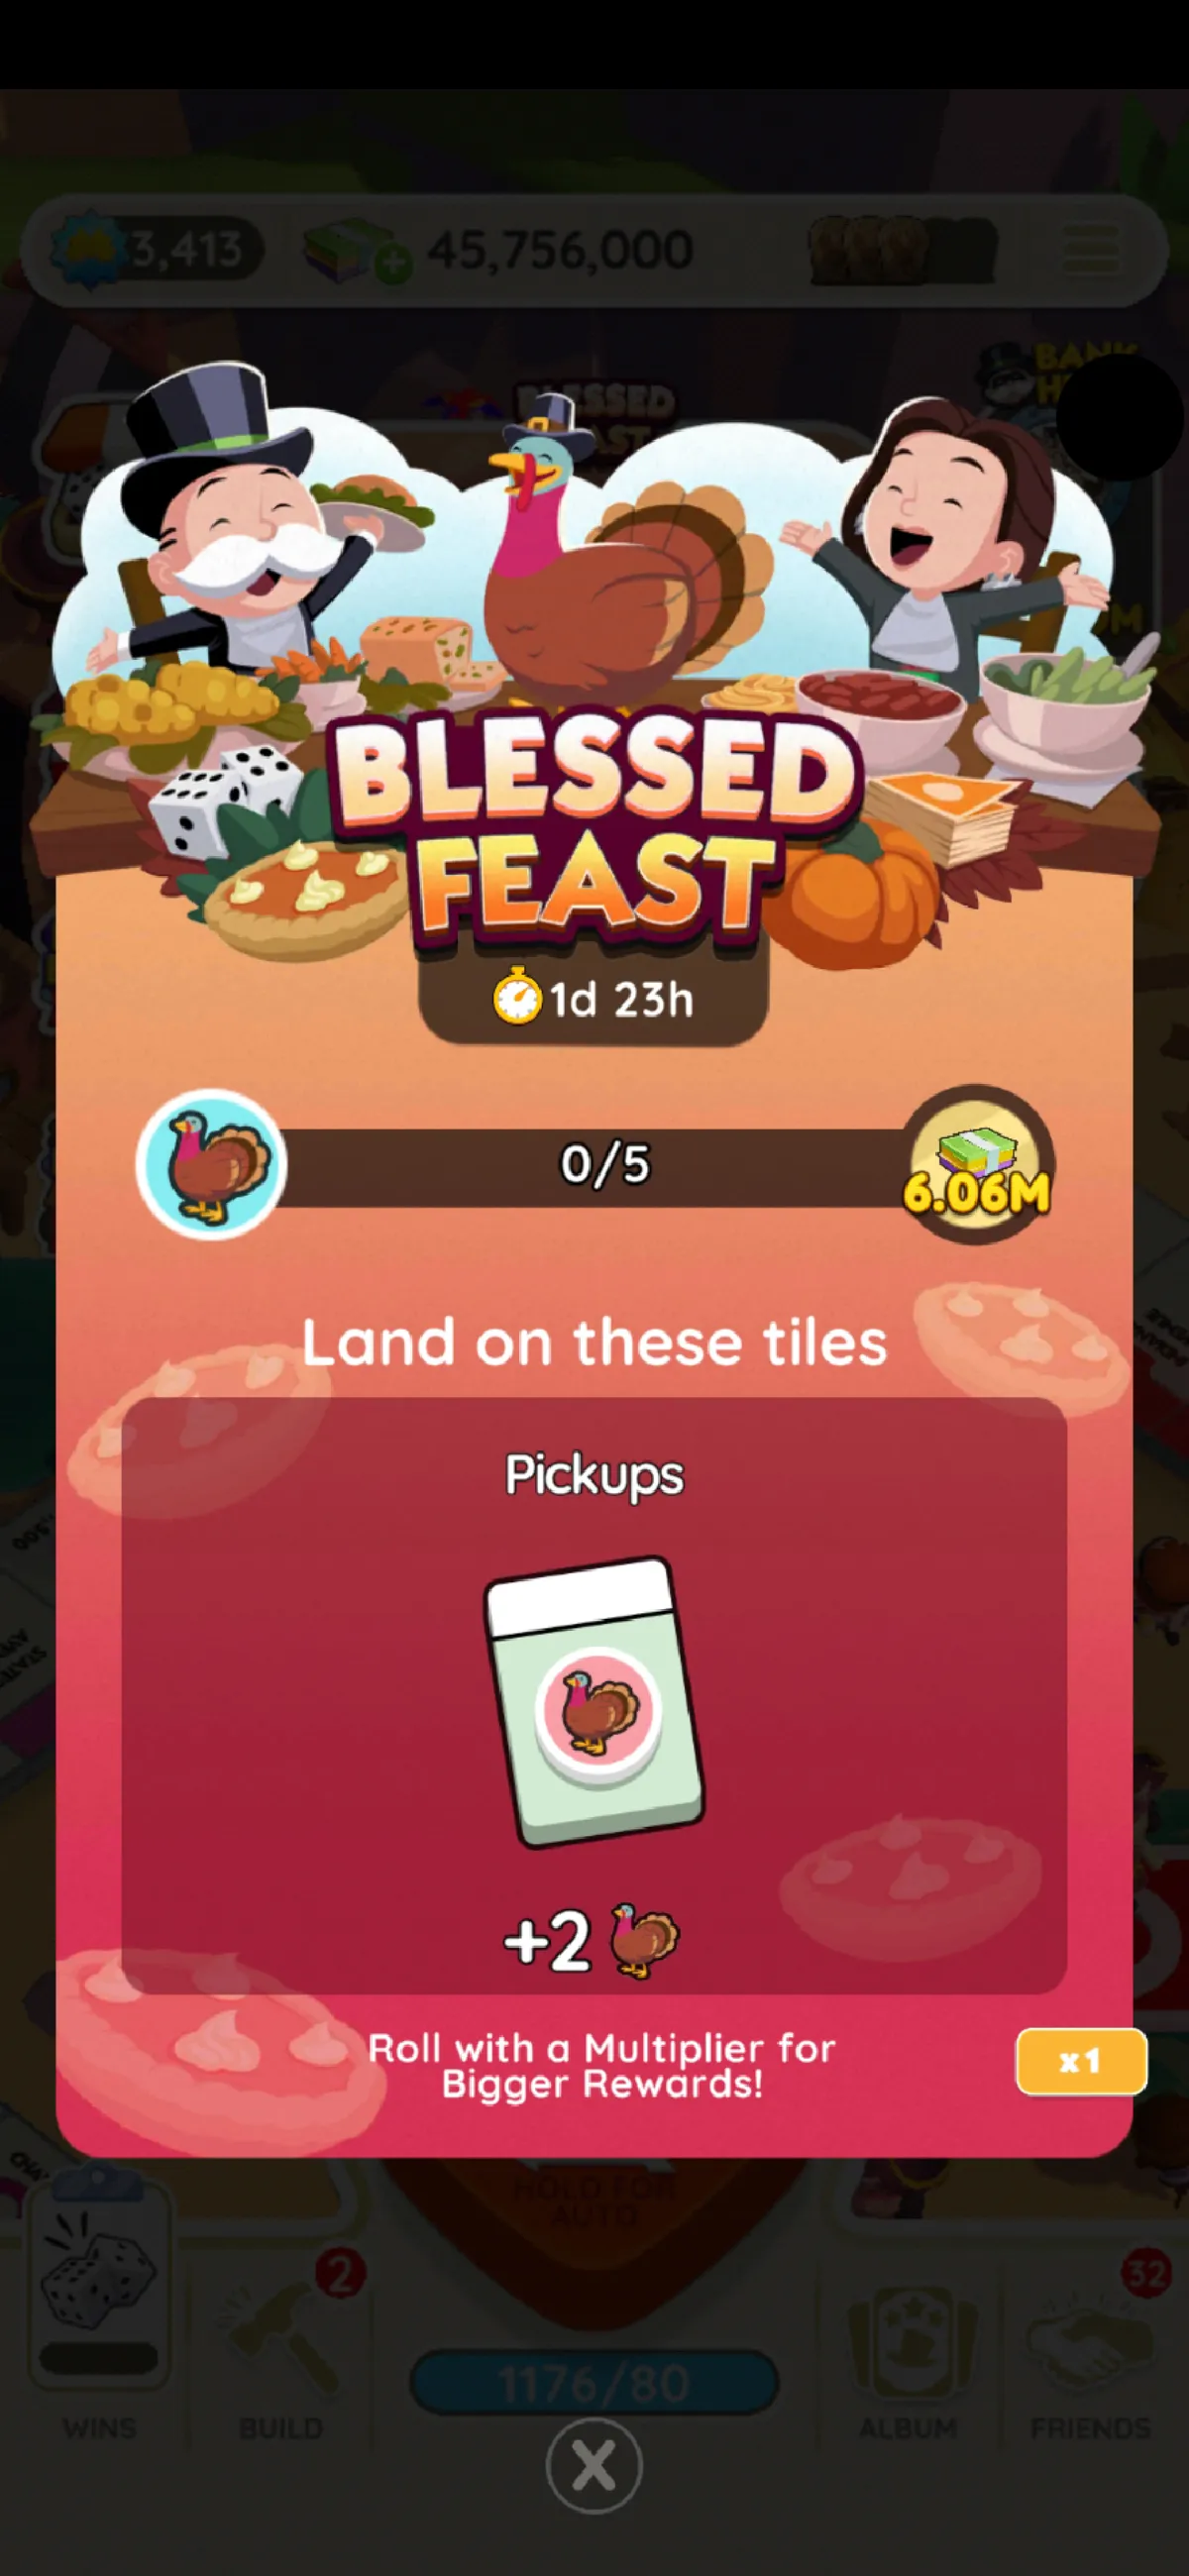 An image for the Blessed Feast event in Monopoly GO showing Rich Uncle Pennybags looking like an early colonist and looking at a turkey. The image is part of a list of all the rewards, prizes, and milestones you can get for the event in Monopoly GO.